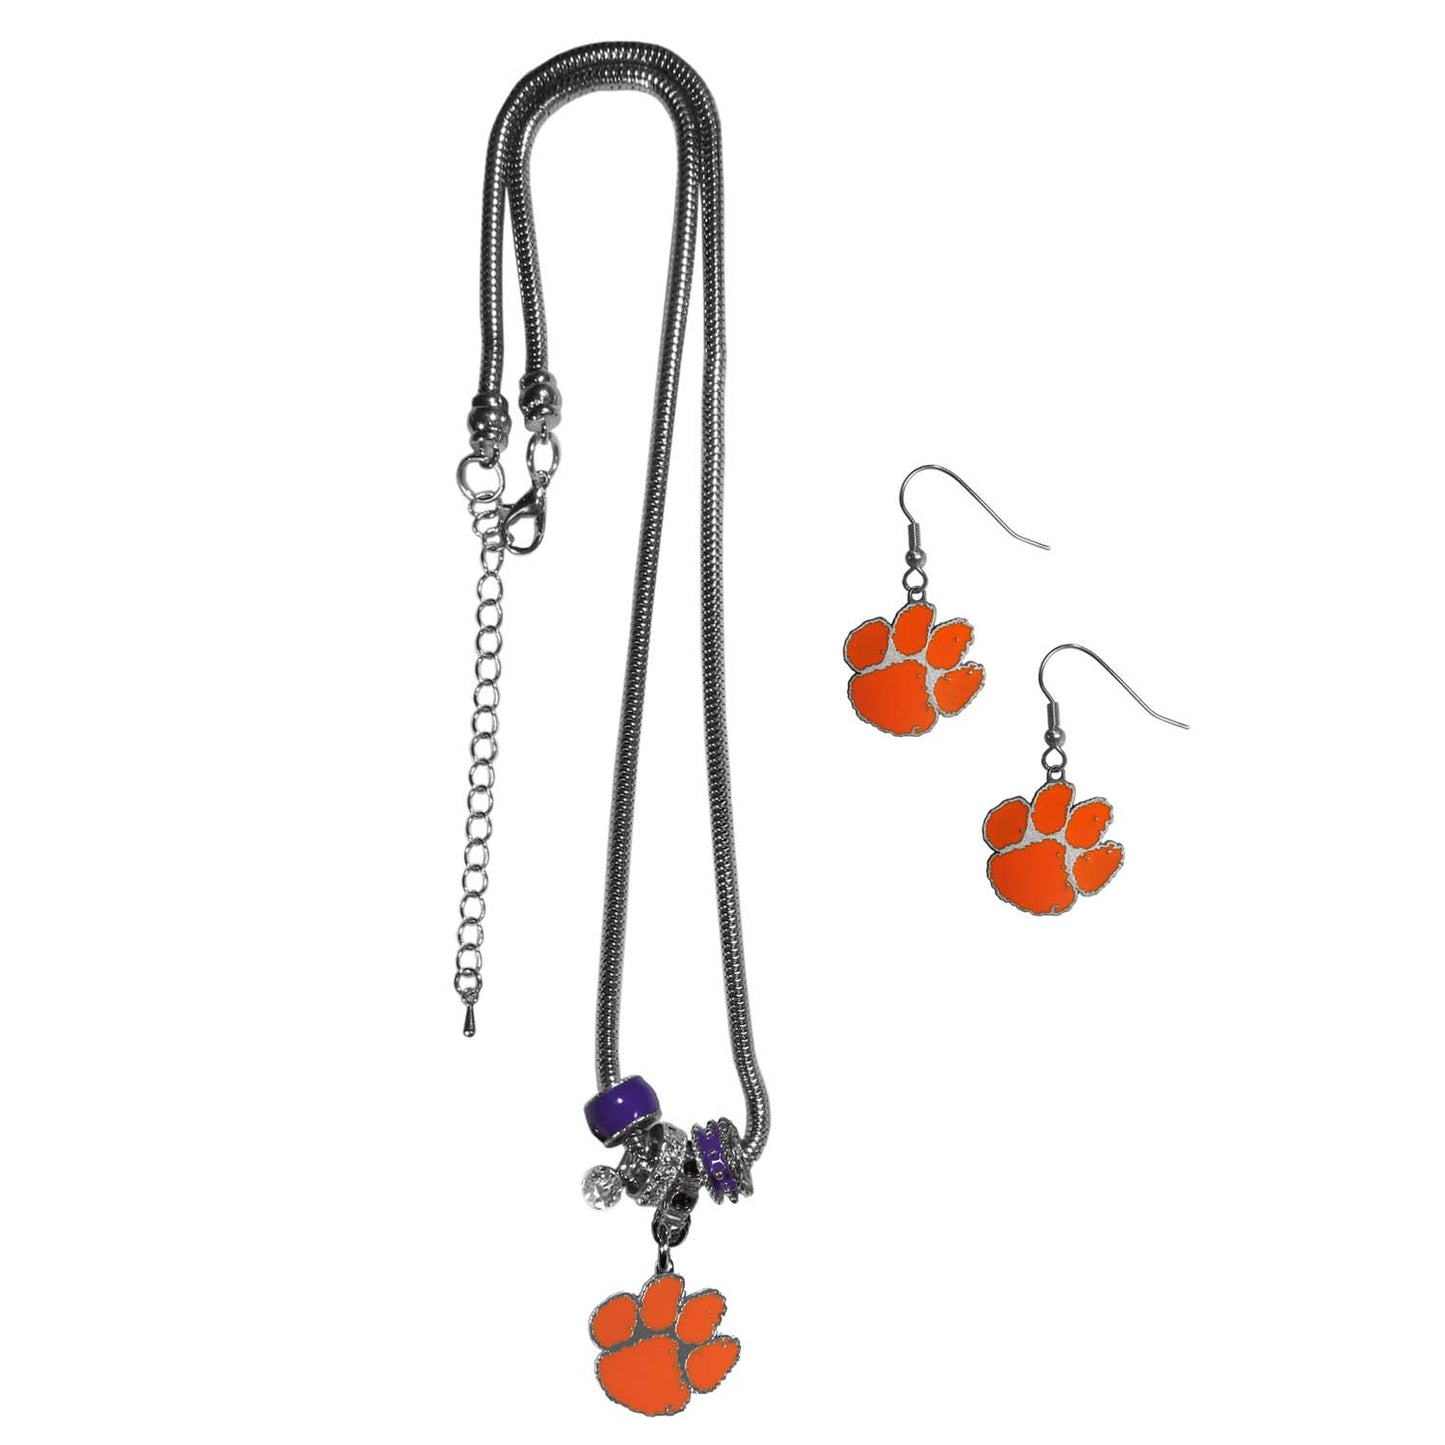 Clemson Tigers Collegiate Game Day Necklace and Earrings - Silver